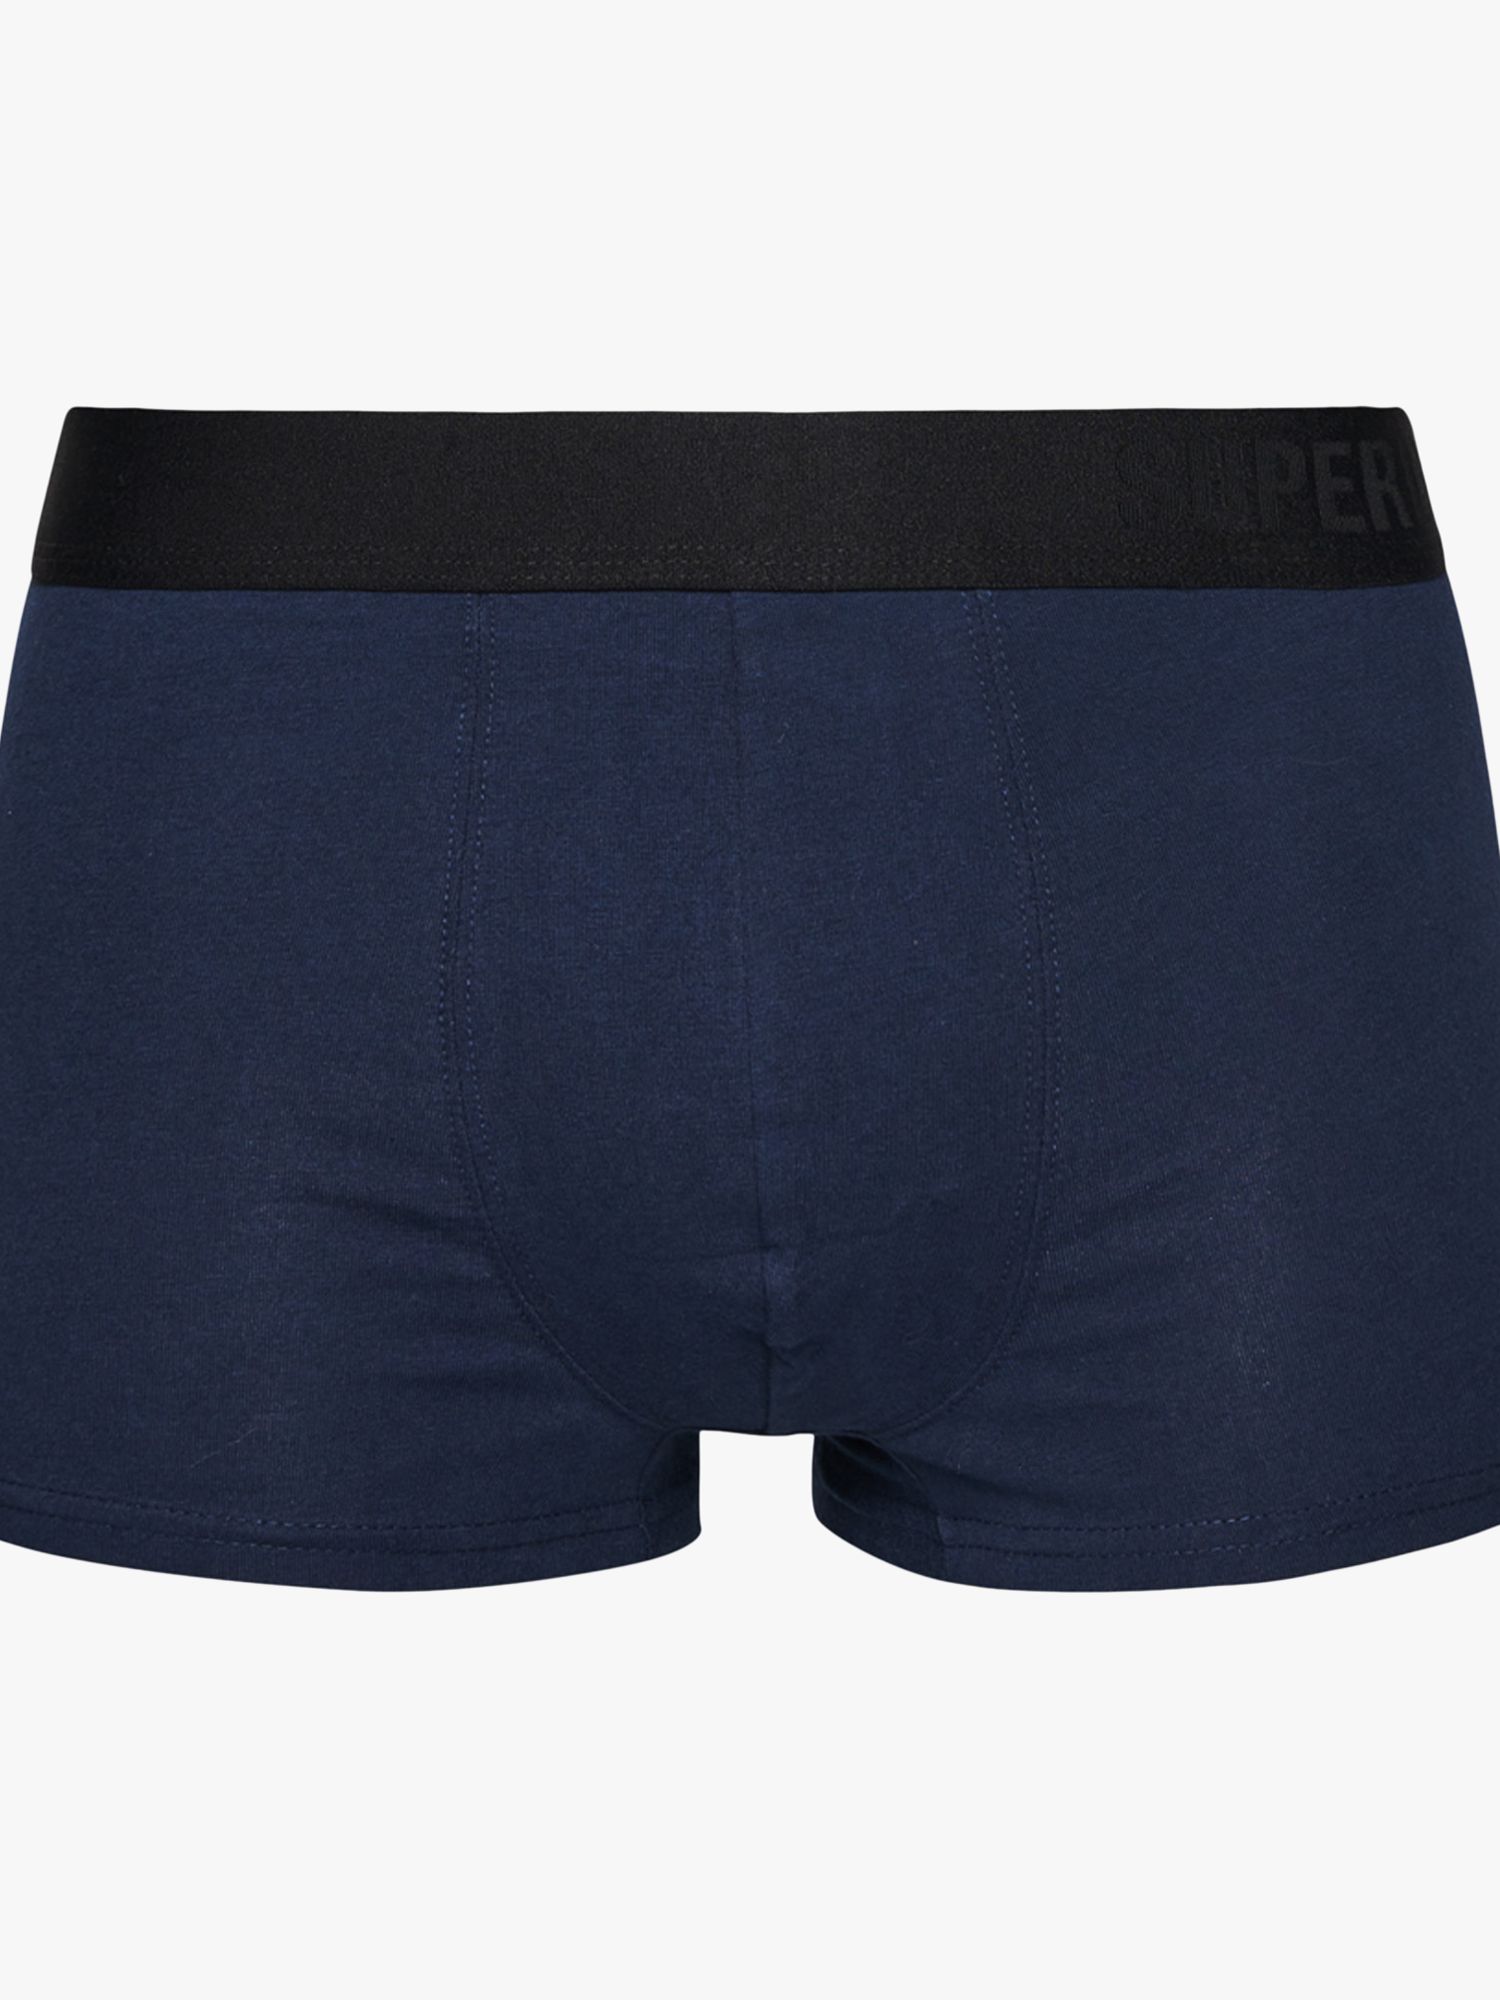 Superdry Organic Cotton Trunk Offset Double Pack, Navy/Burgundy at John ...